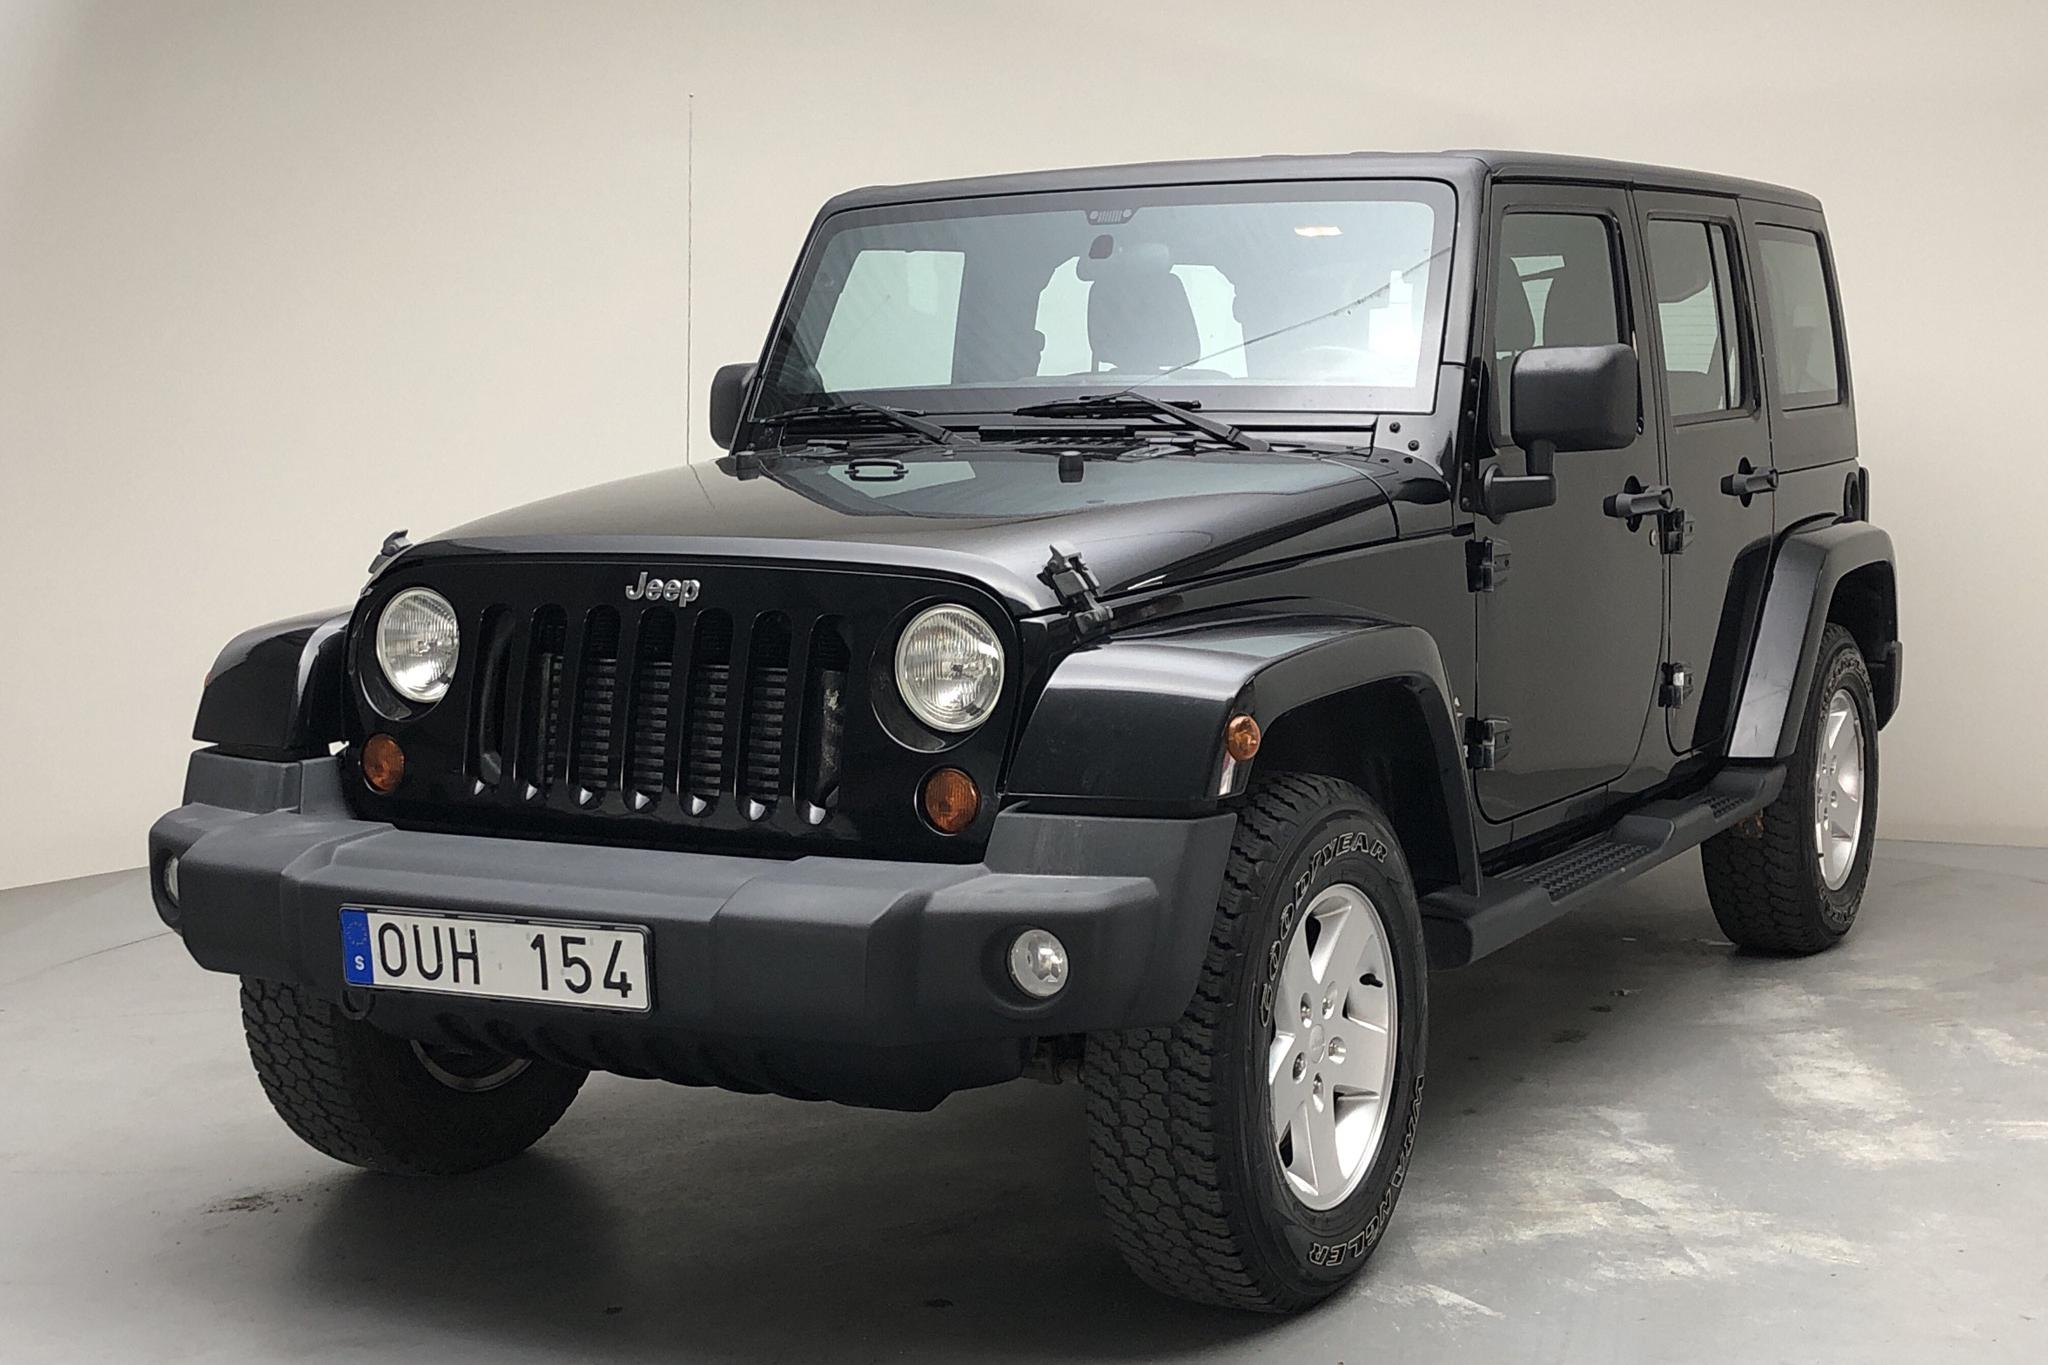 Jeep Wrangler Unlimited 2.8 CRD 4dr (200hk) - 125 610 km - Automatic - black - 2012